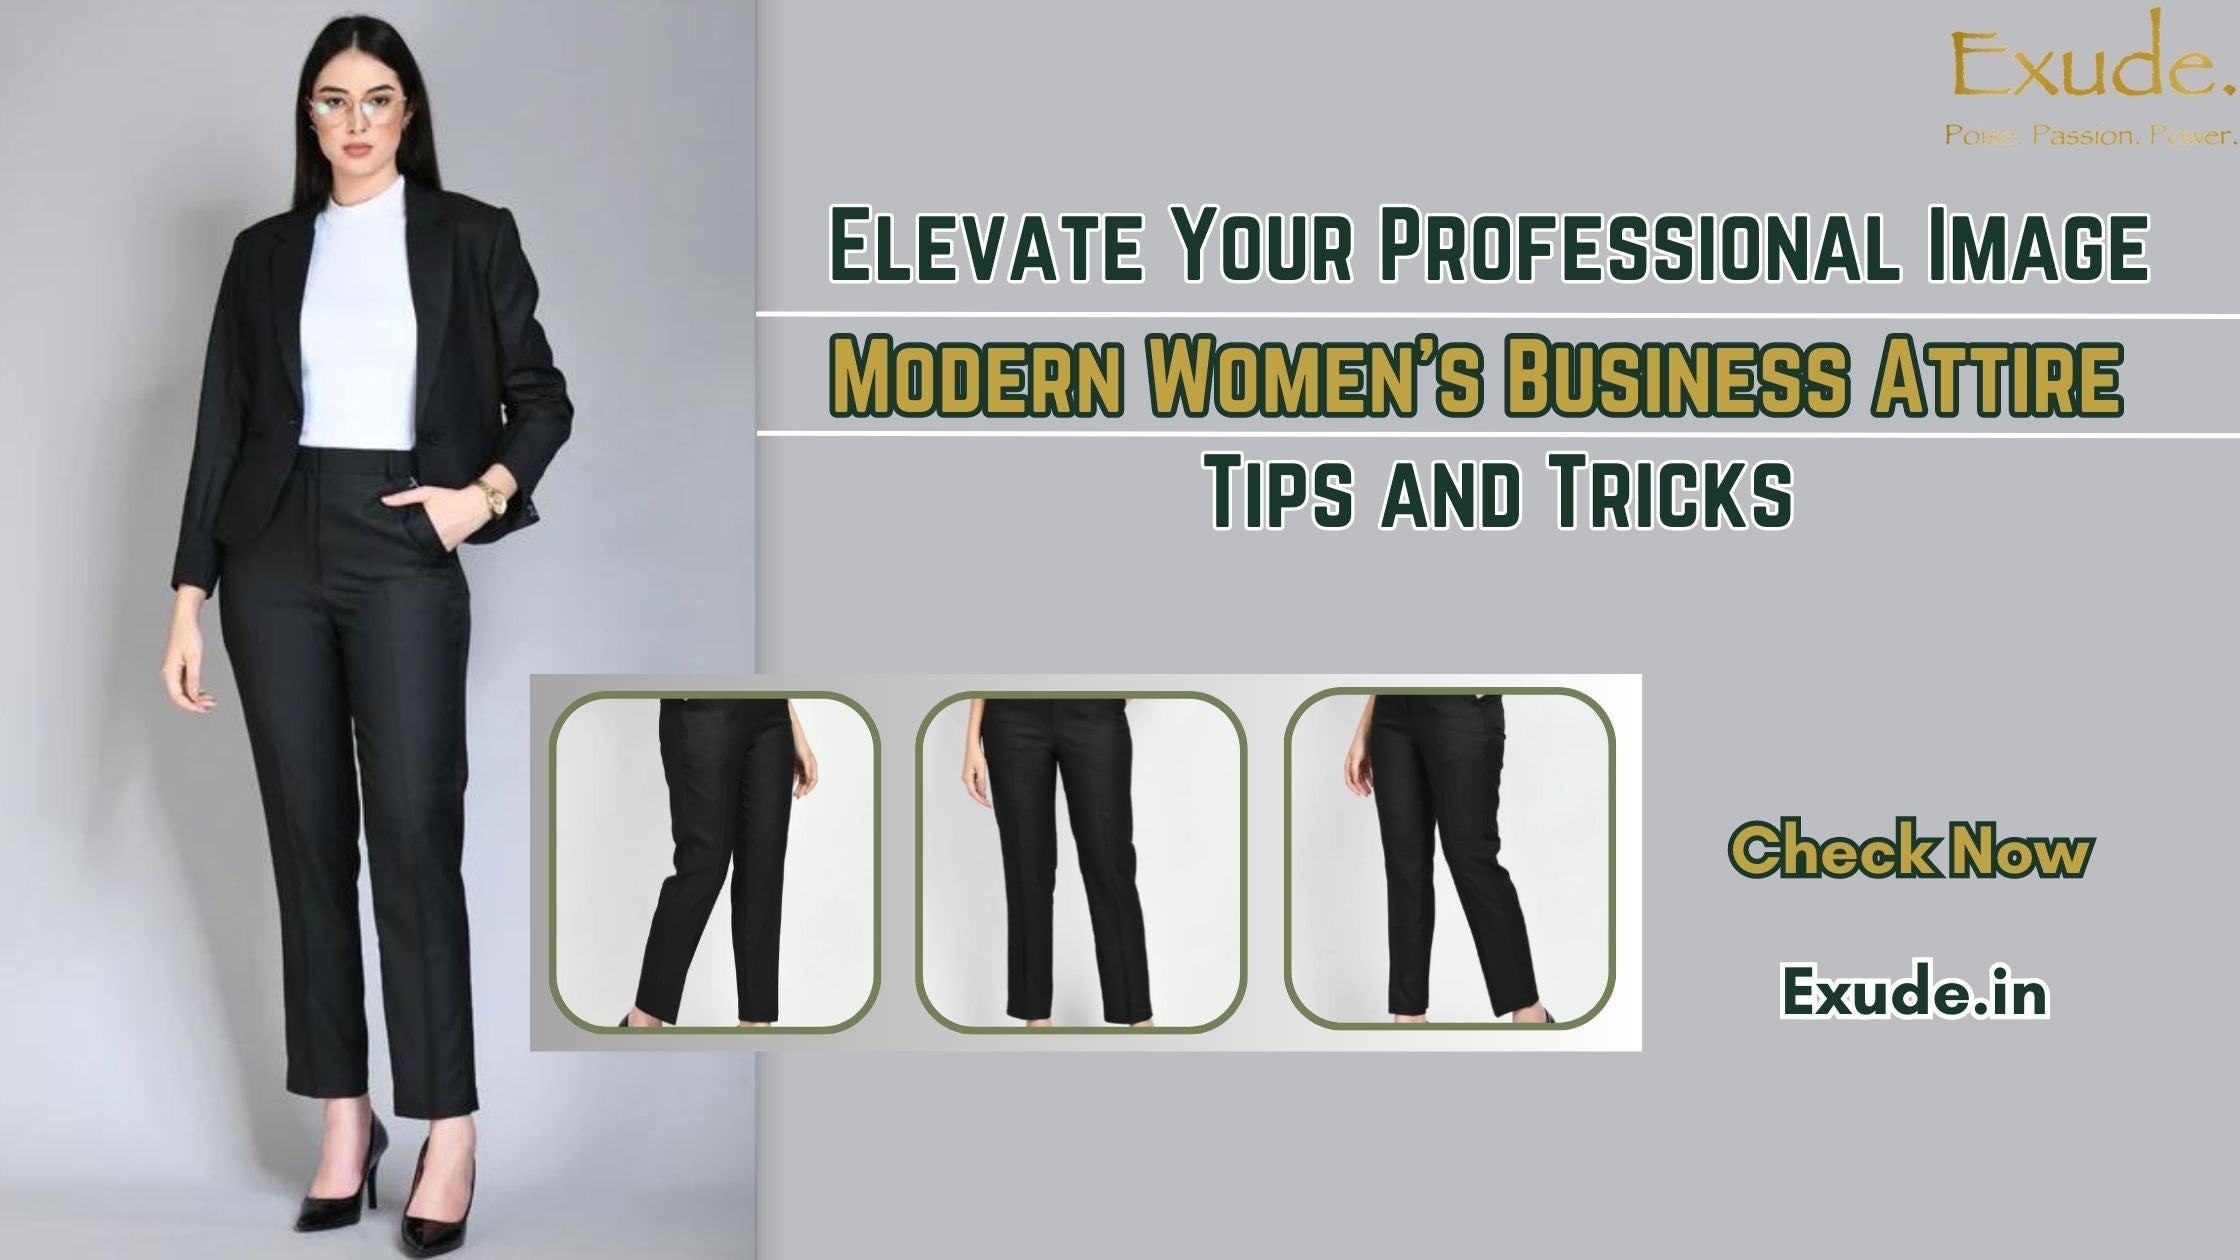 Buy modern women's business attire from exude.in – Exude